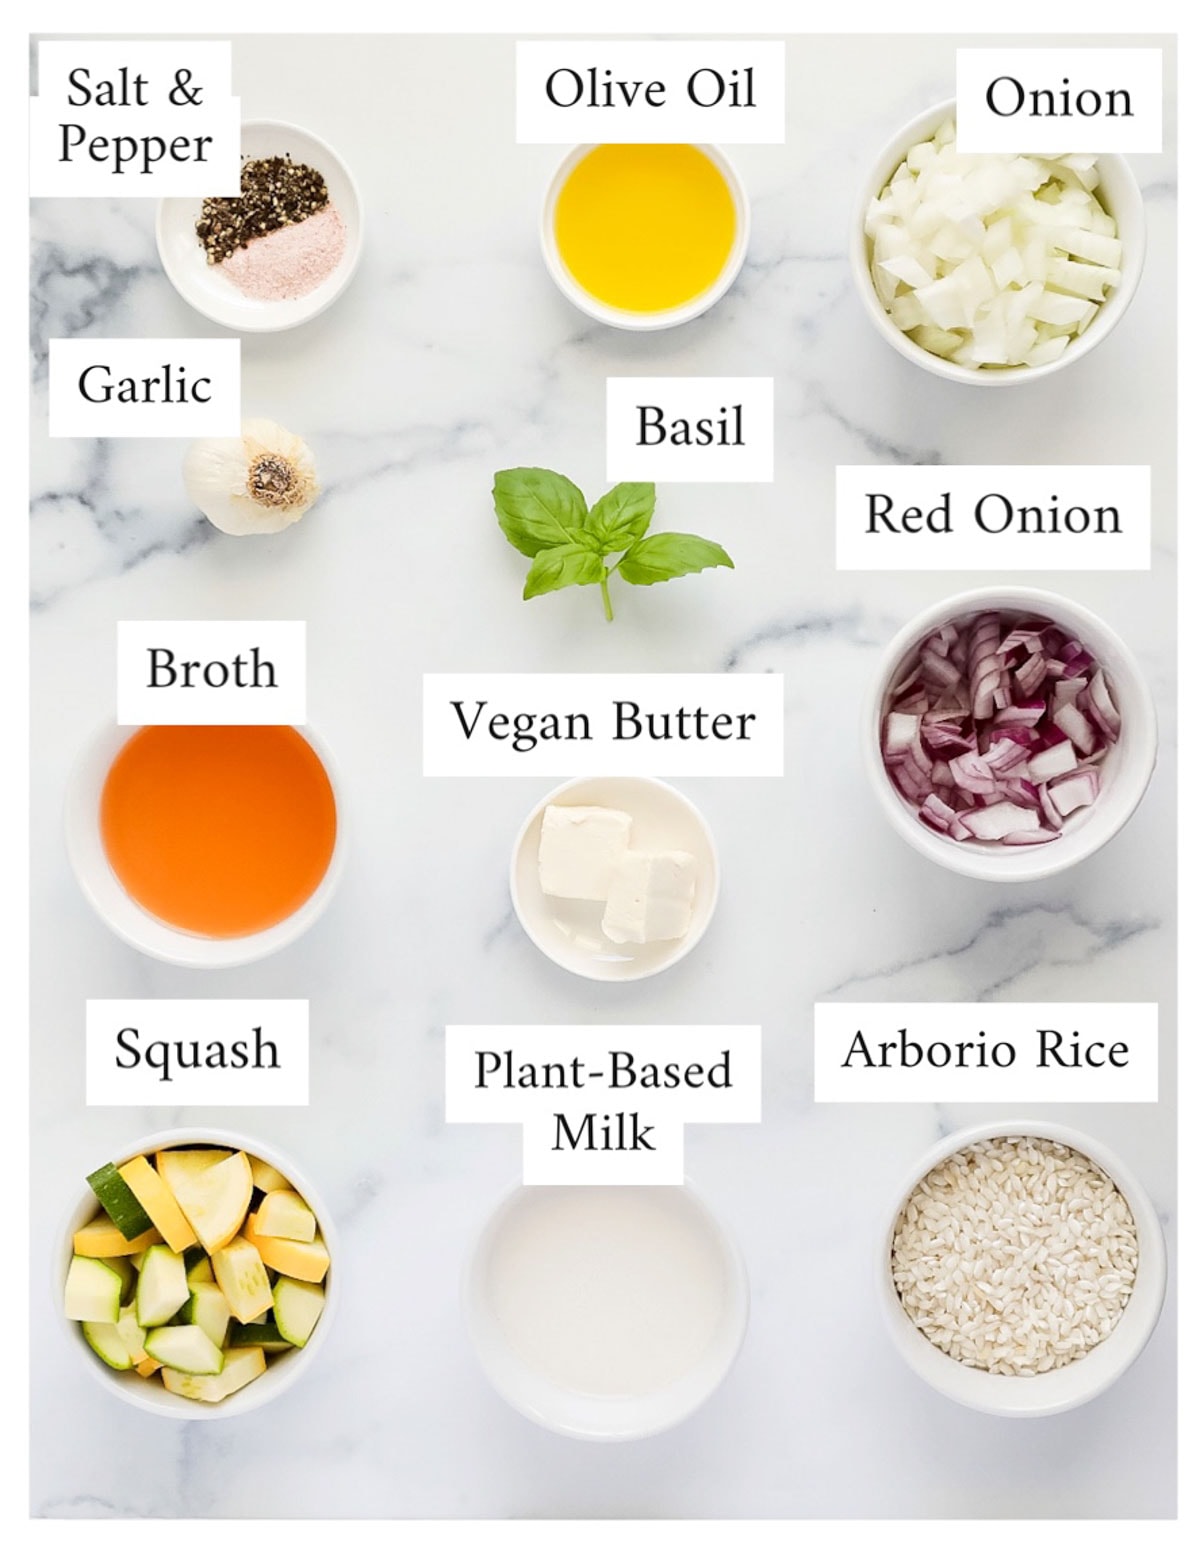 Labeled ingredients including: salt & pepper, olive oil, onion, garlic, basil, red onion, broth, vegan butter, red onion, squash, plant-based milk, arborio rice